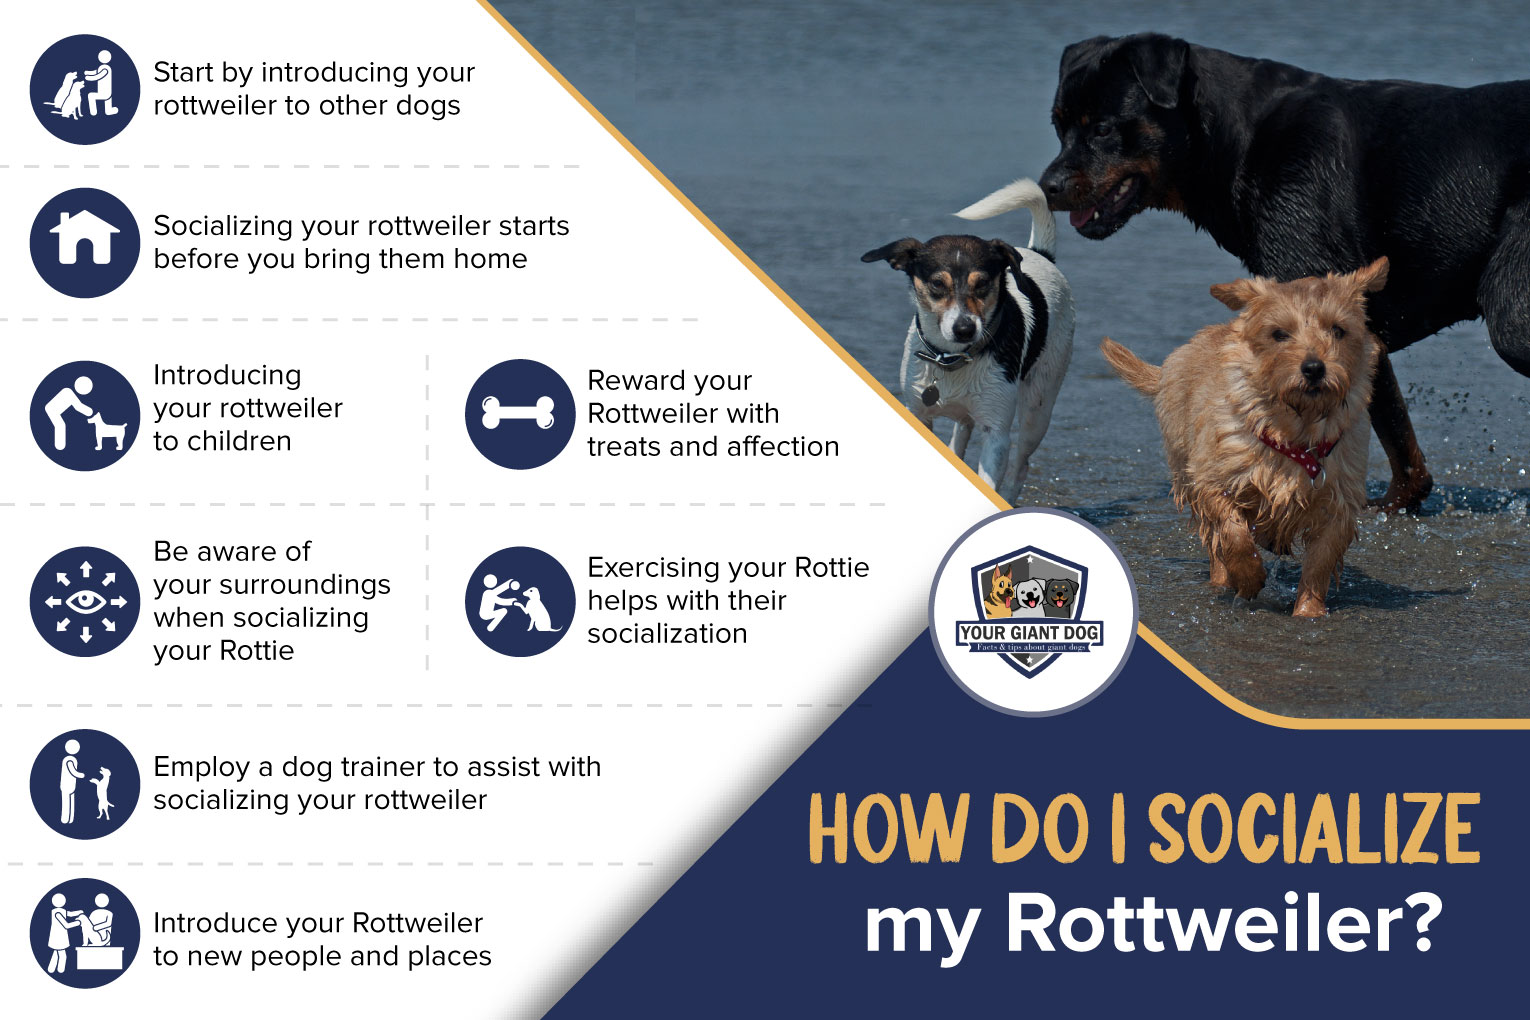 Socializing your Rottweiler